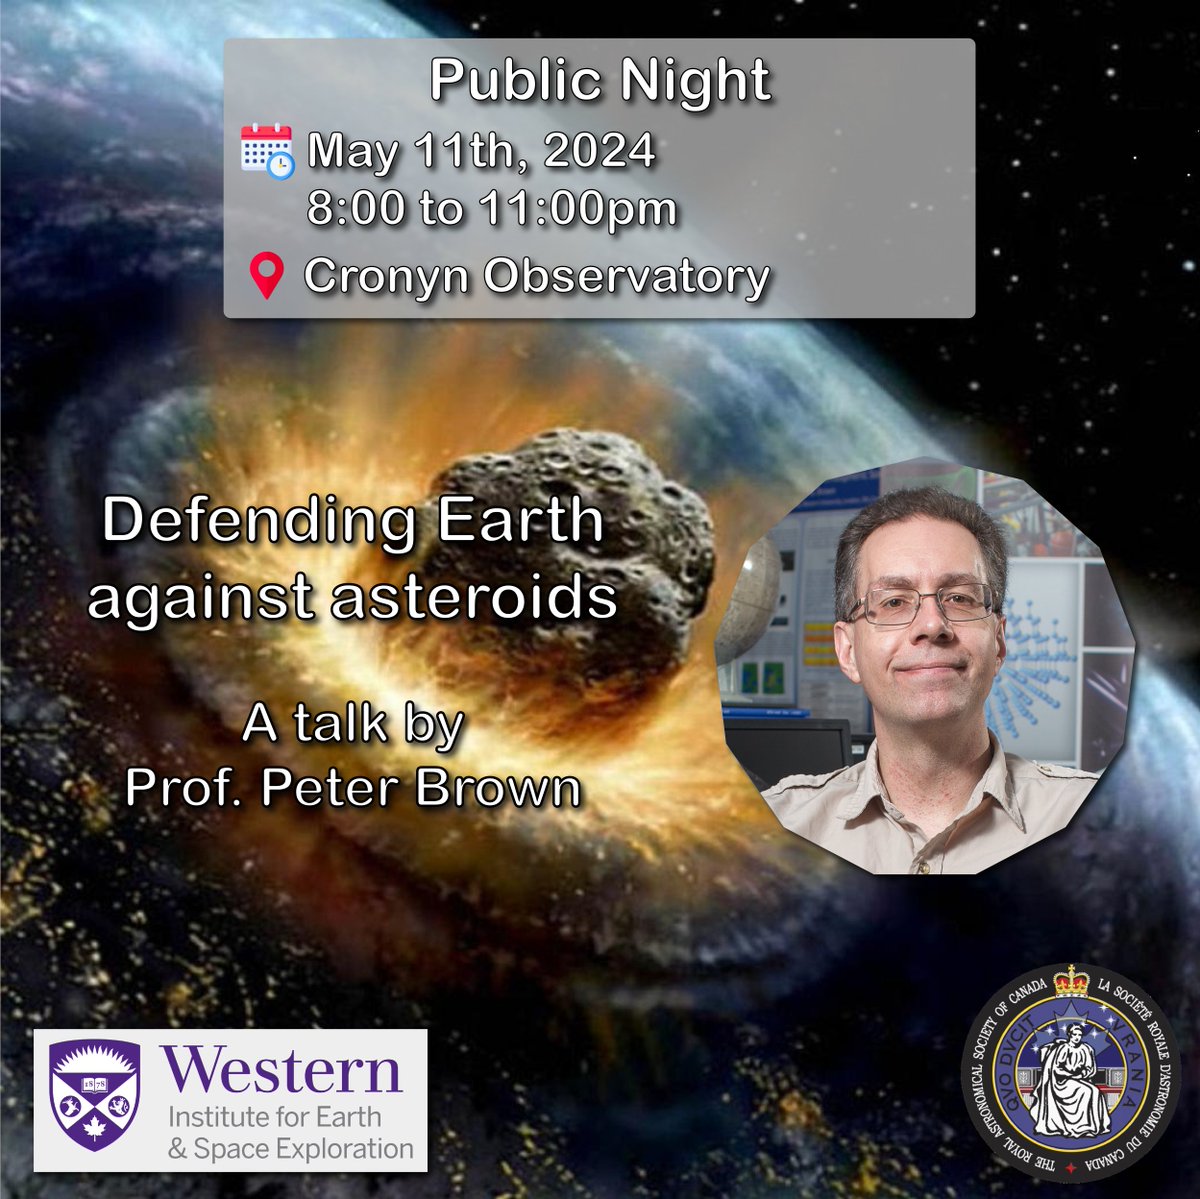 We welcome you all to our next public night, on Saturday, May 11th, from 8:00 pm to 11:00 pm. Prof. Peter Brown, a world expert on asteroids, will be talking about how we can defend our Planet Earth from asteroid impacts!